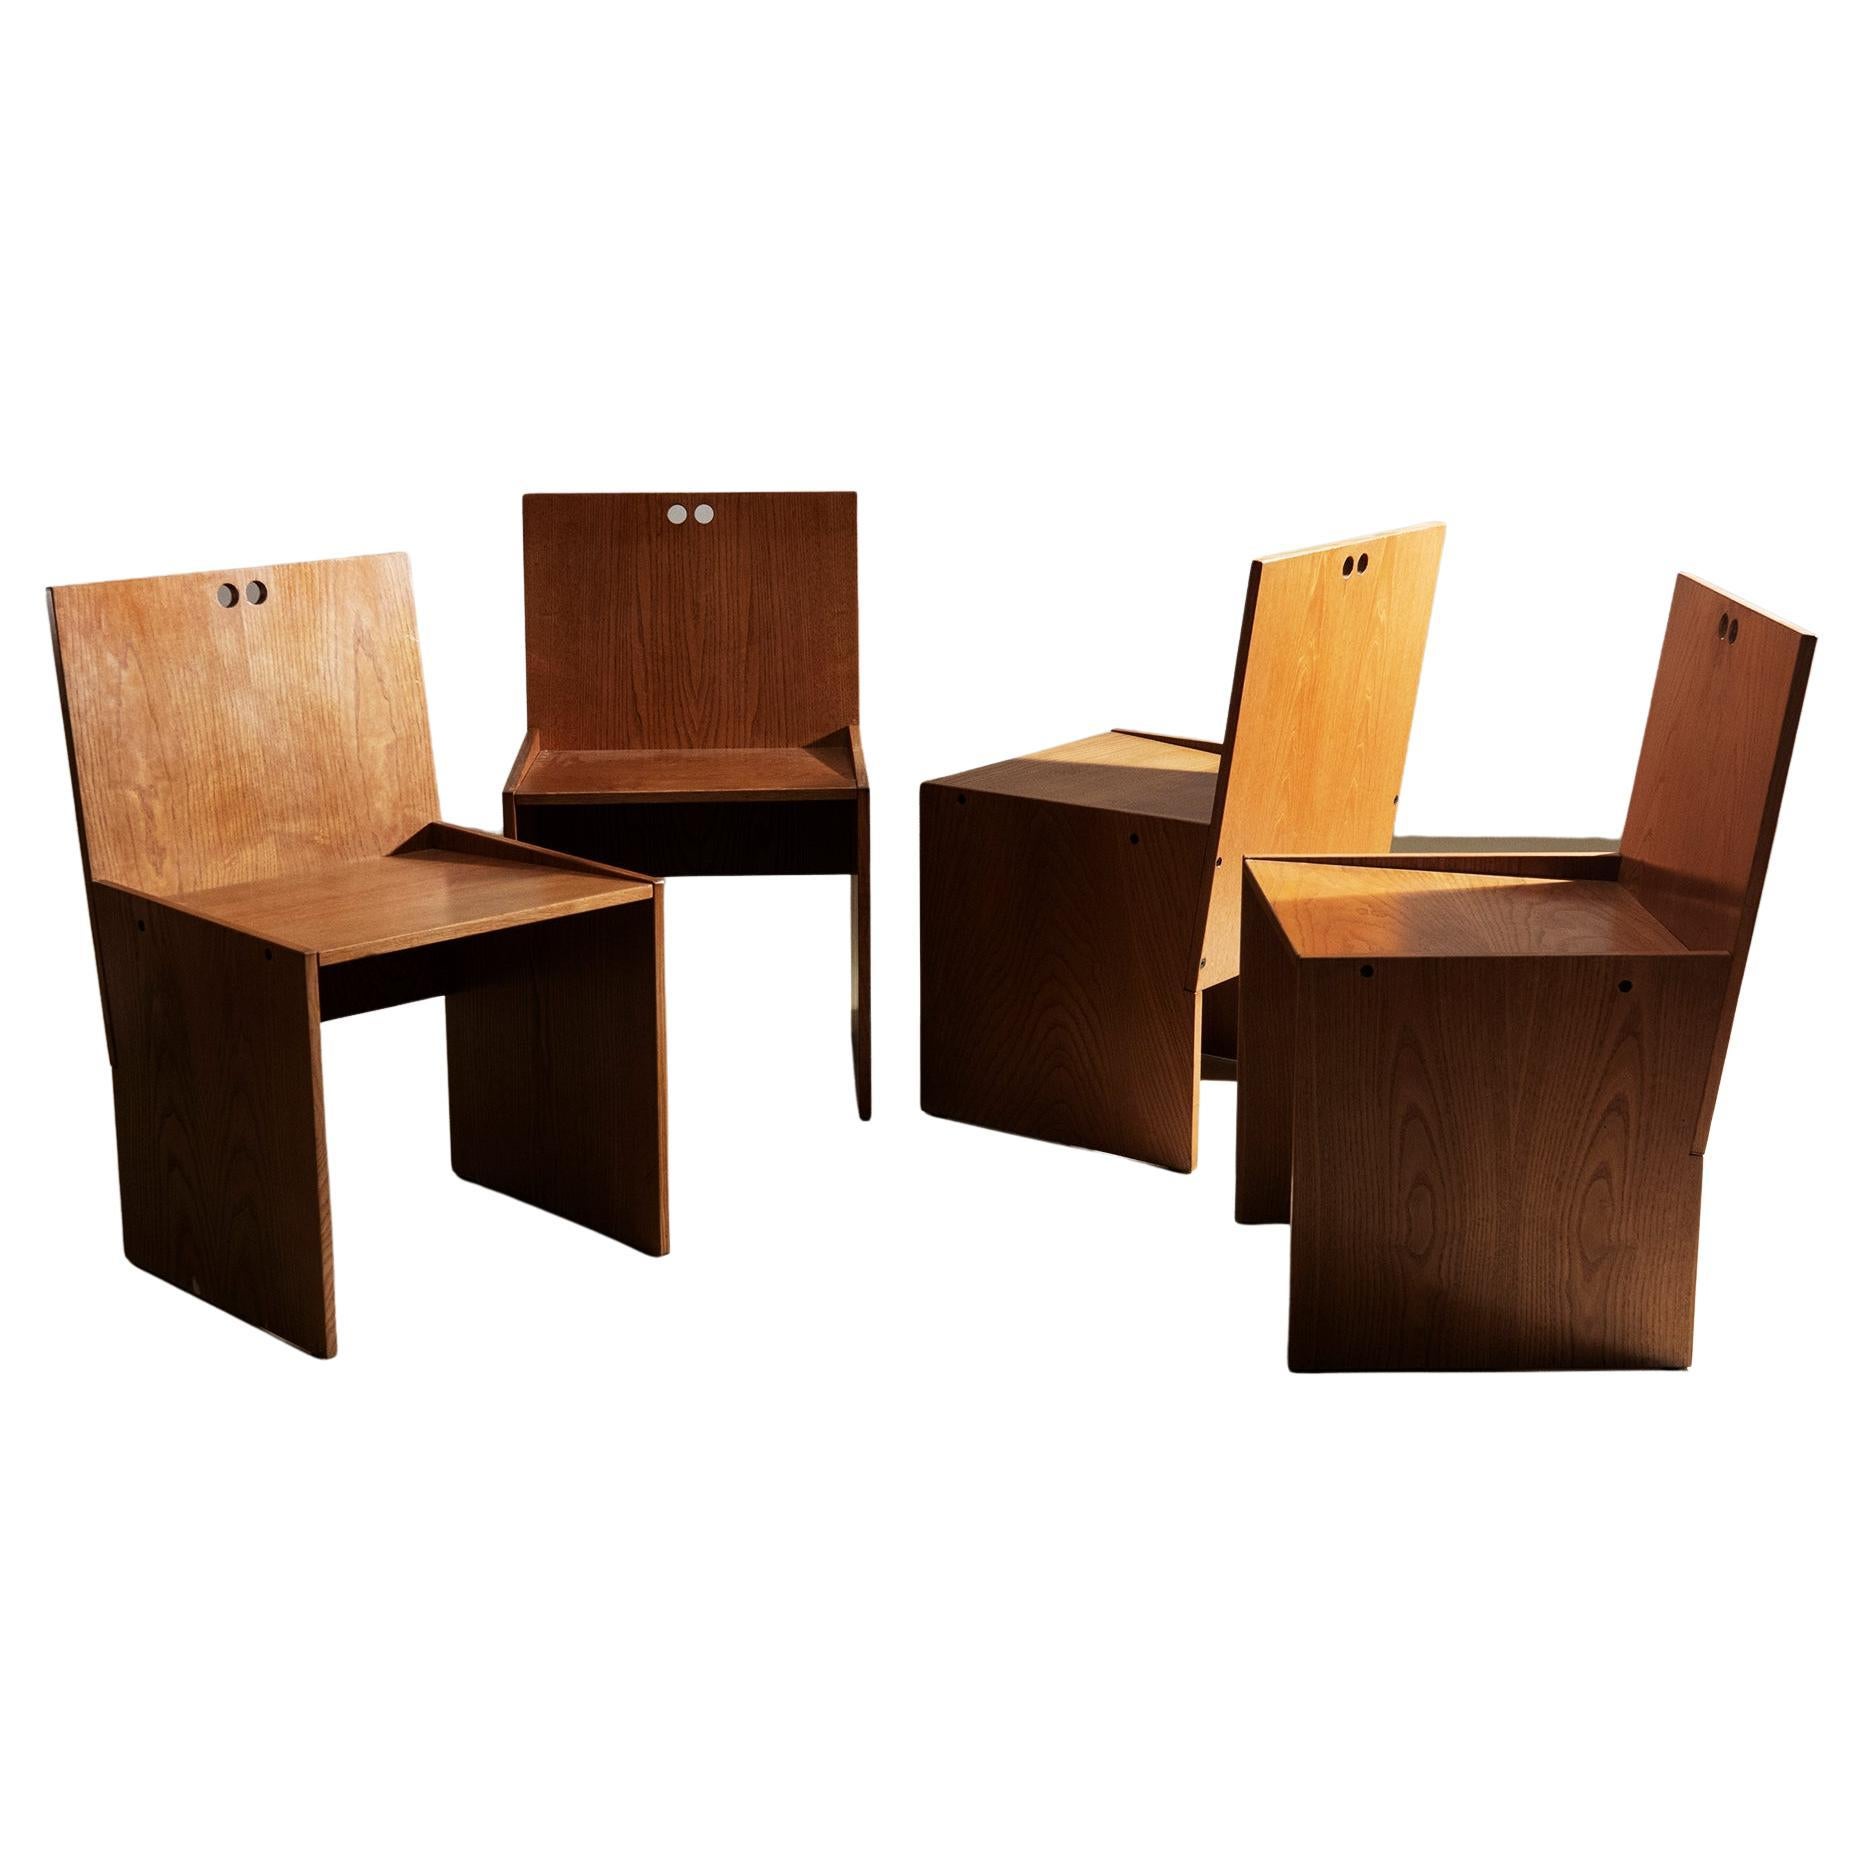 Set of Four Chairs, Italian Production